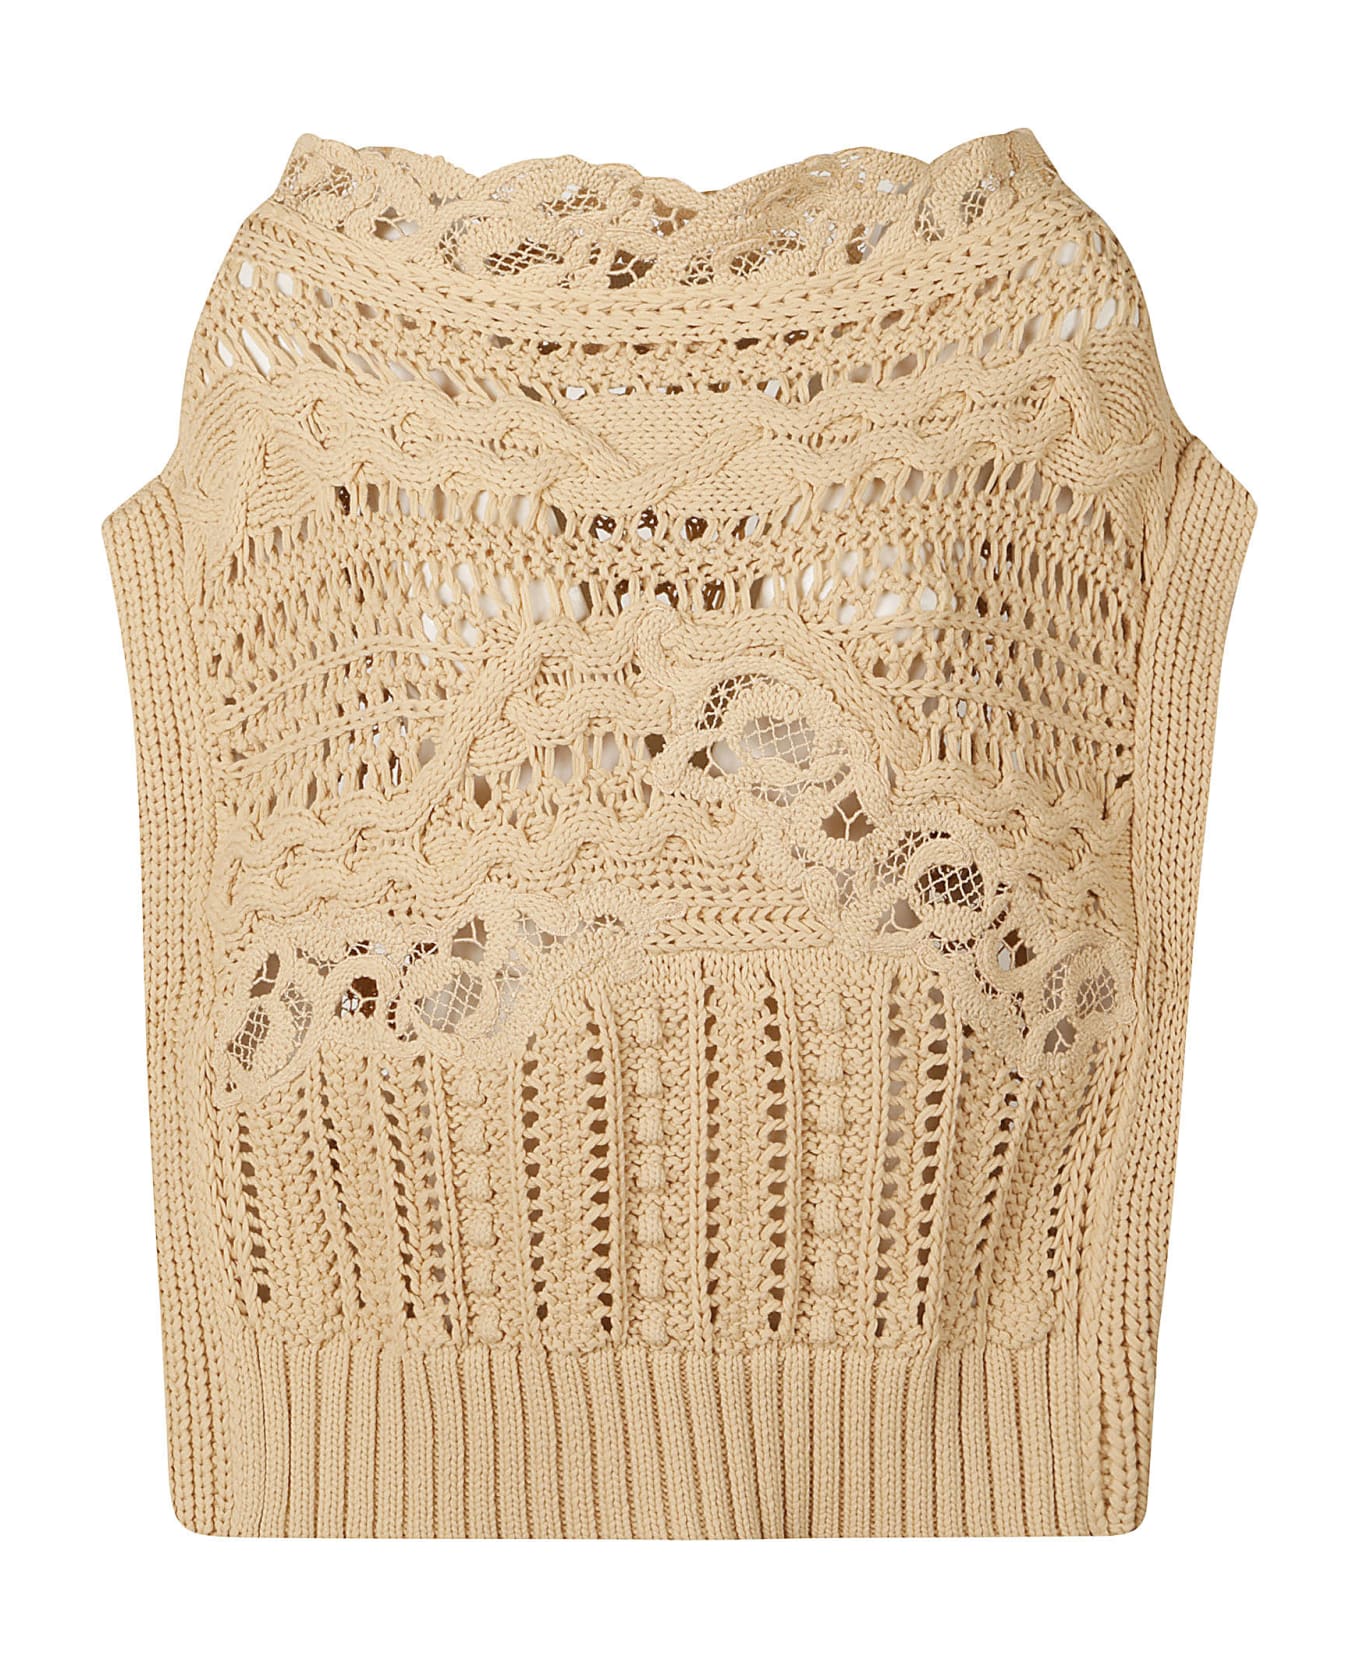 Ermanno Scervino Perforated Rib Trim Knit Top - Beige トップス